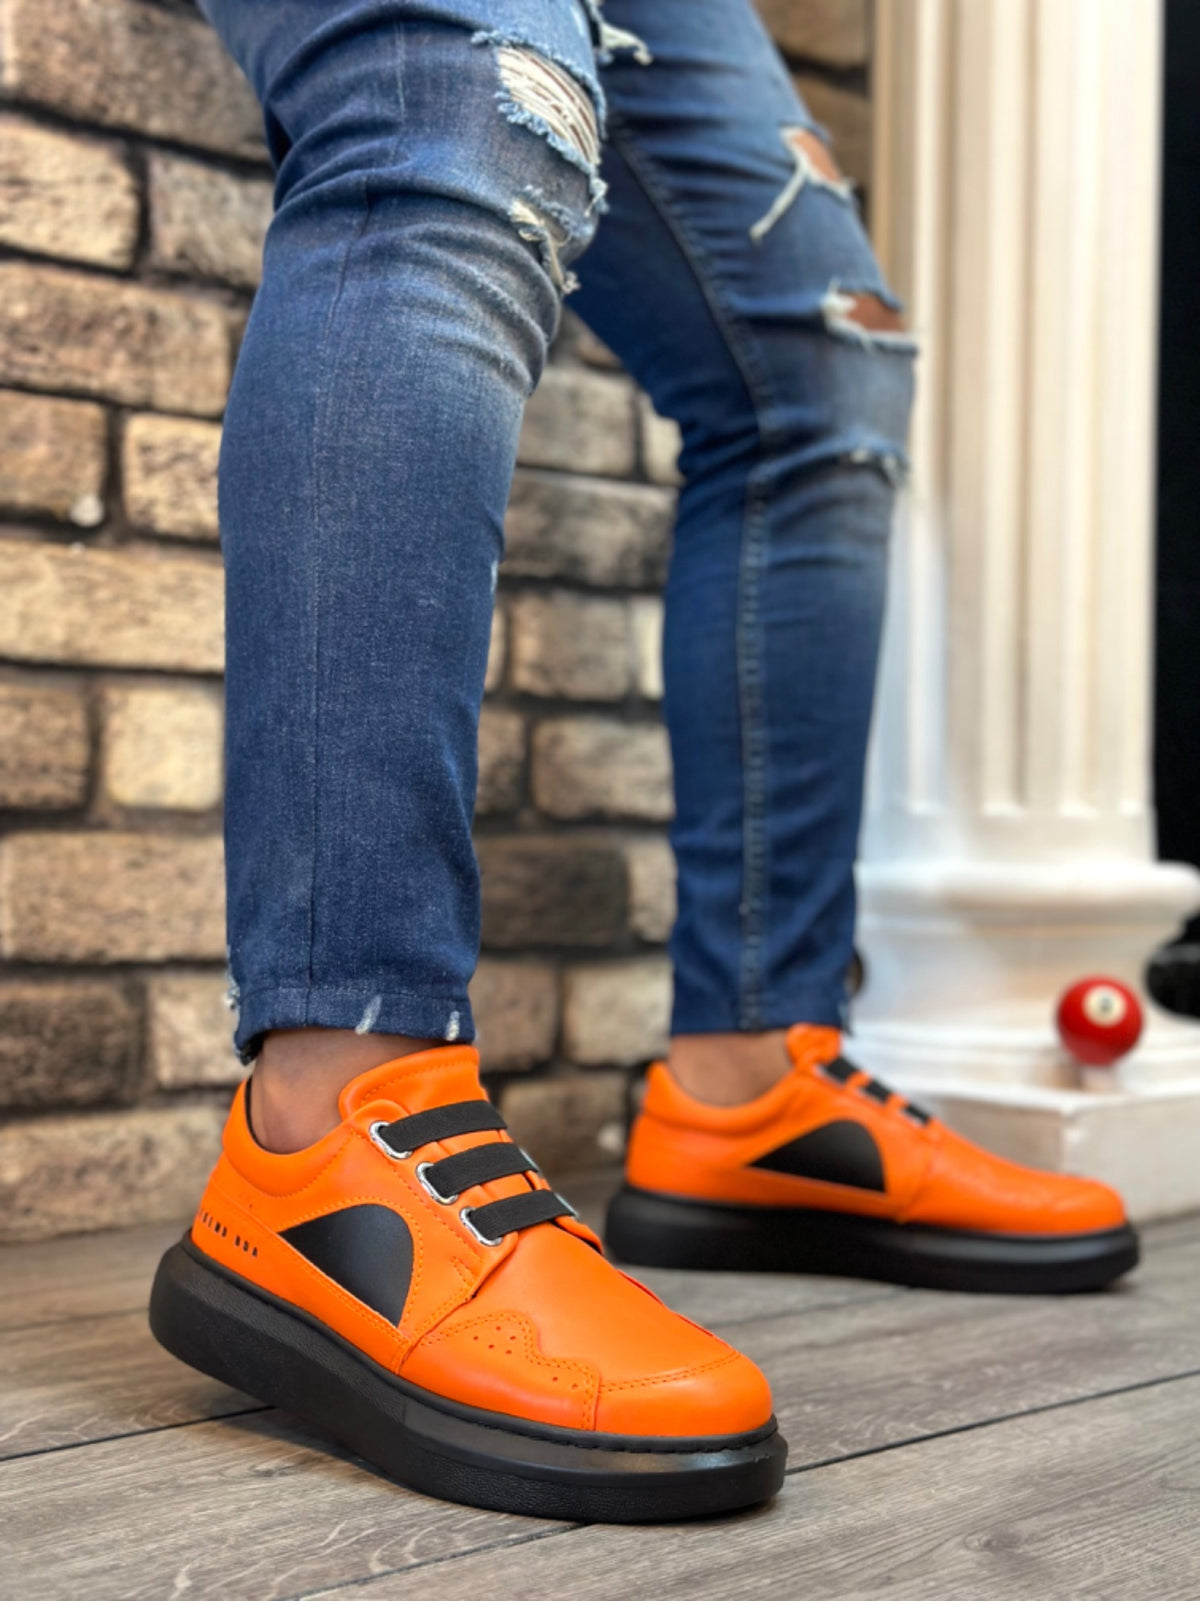 BA0302 Thick Sole Lace-Up Style Casual Orange Men's Sneakers Shoes - STREETMODE™